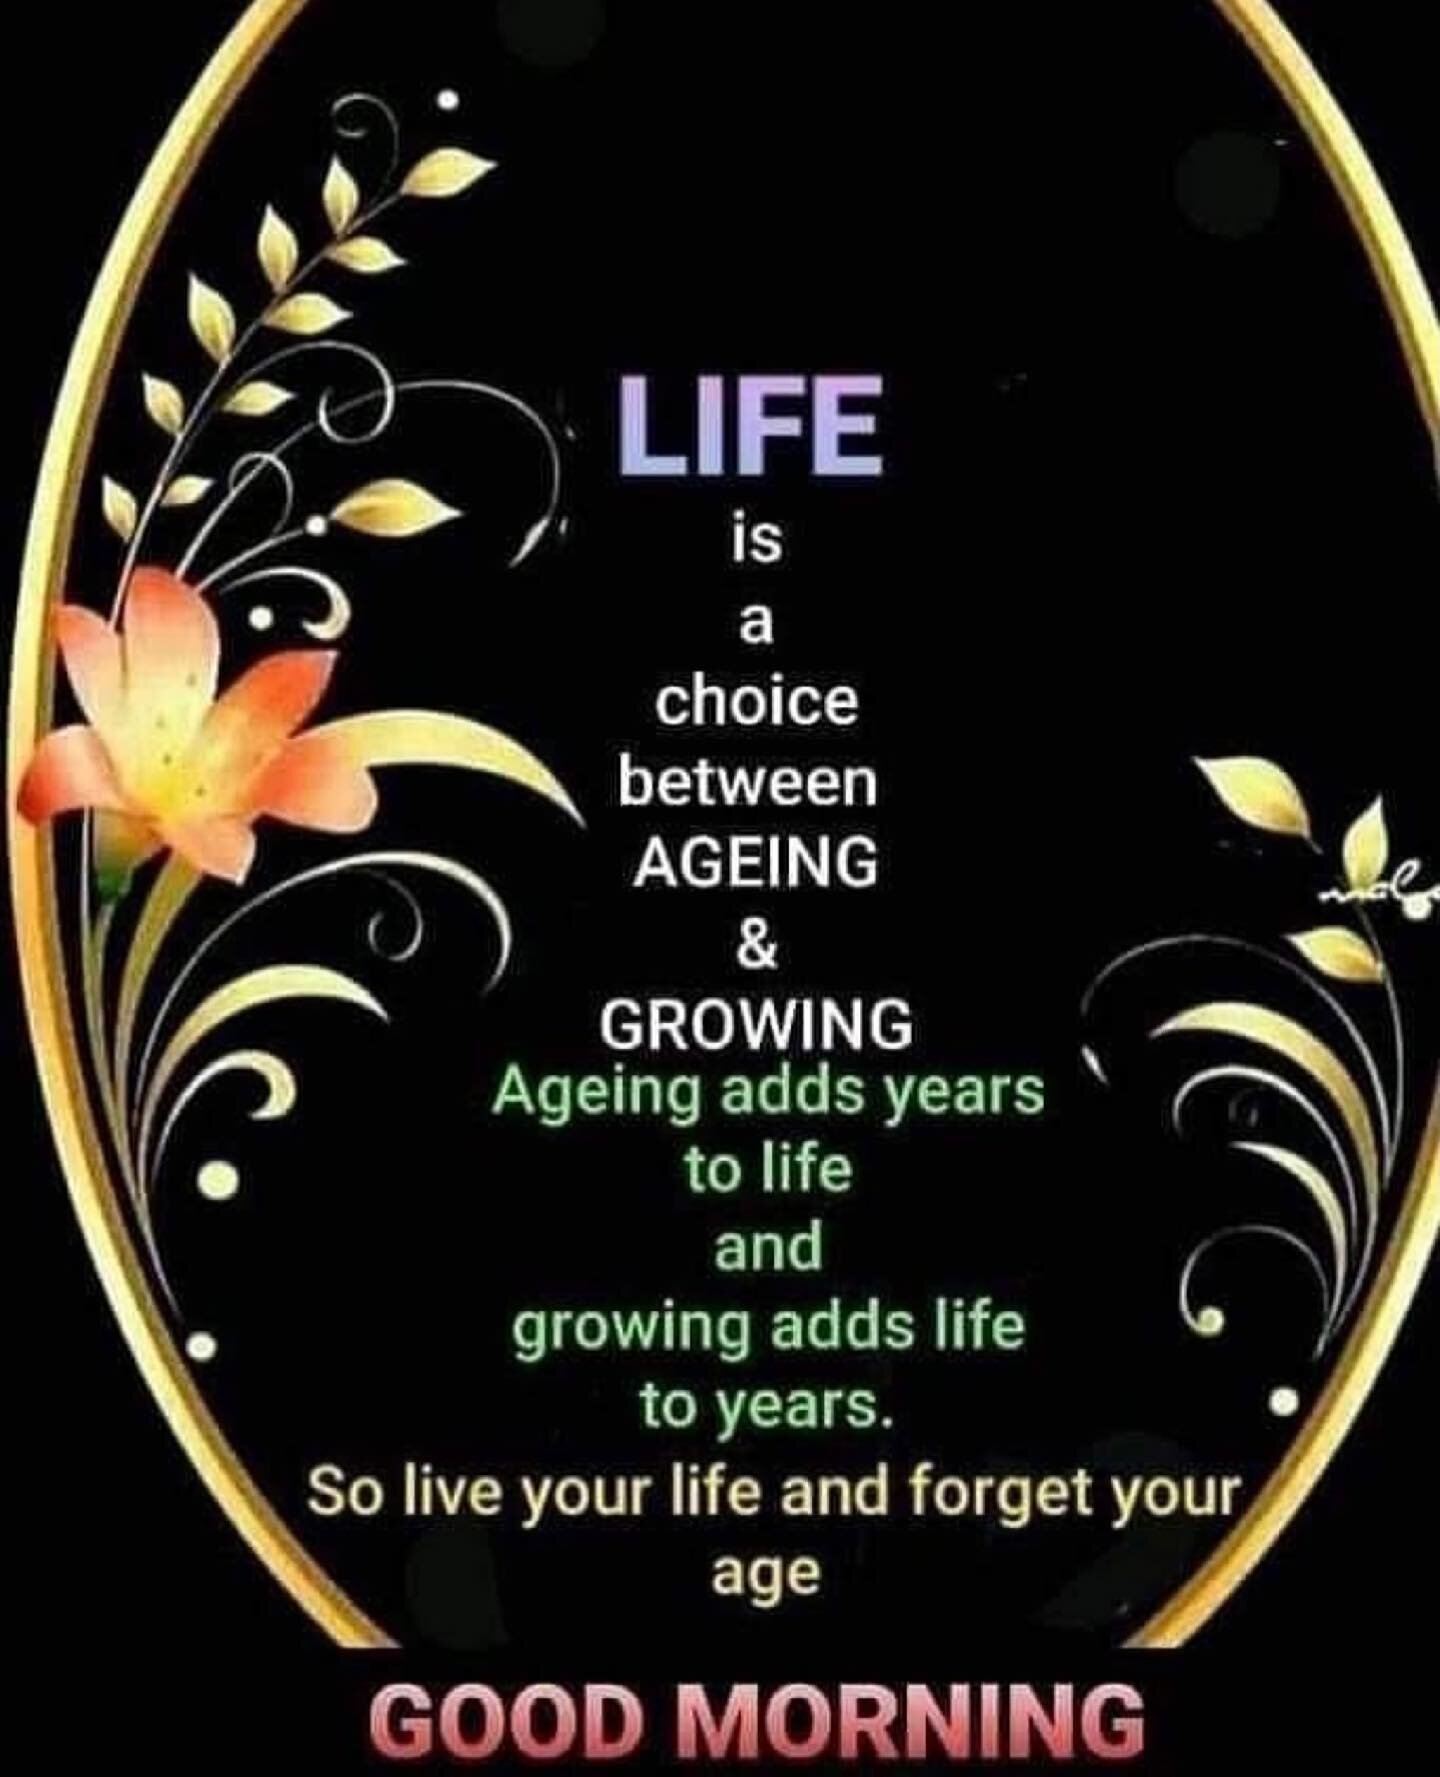 I had to repost 😀
I received this quote from my good friend @dreid47 and had to repost , it&rsquo;s an awesome quote , very much resonates with me . Thank you for sharing D.
Have a great Friday !
#live #liveyourbestlife 
#liveyourdreams #bestlife 
#